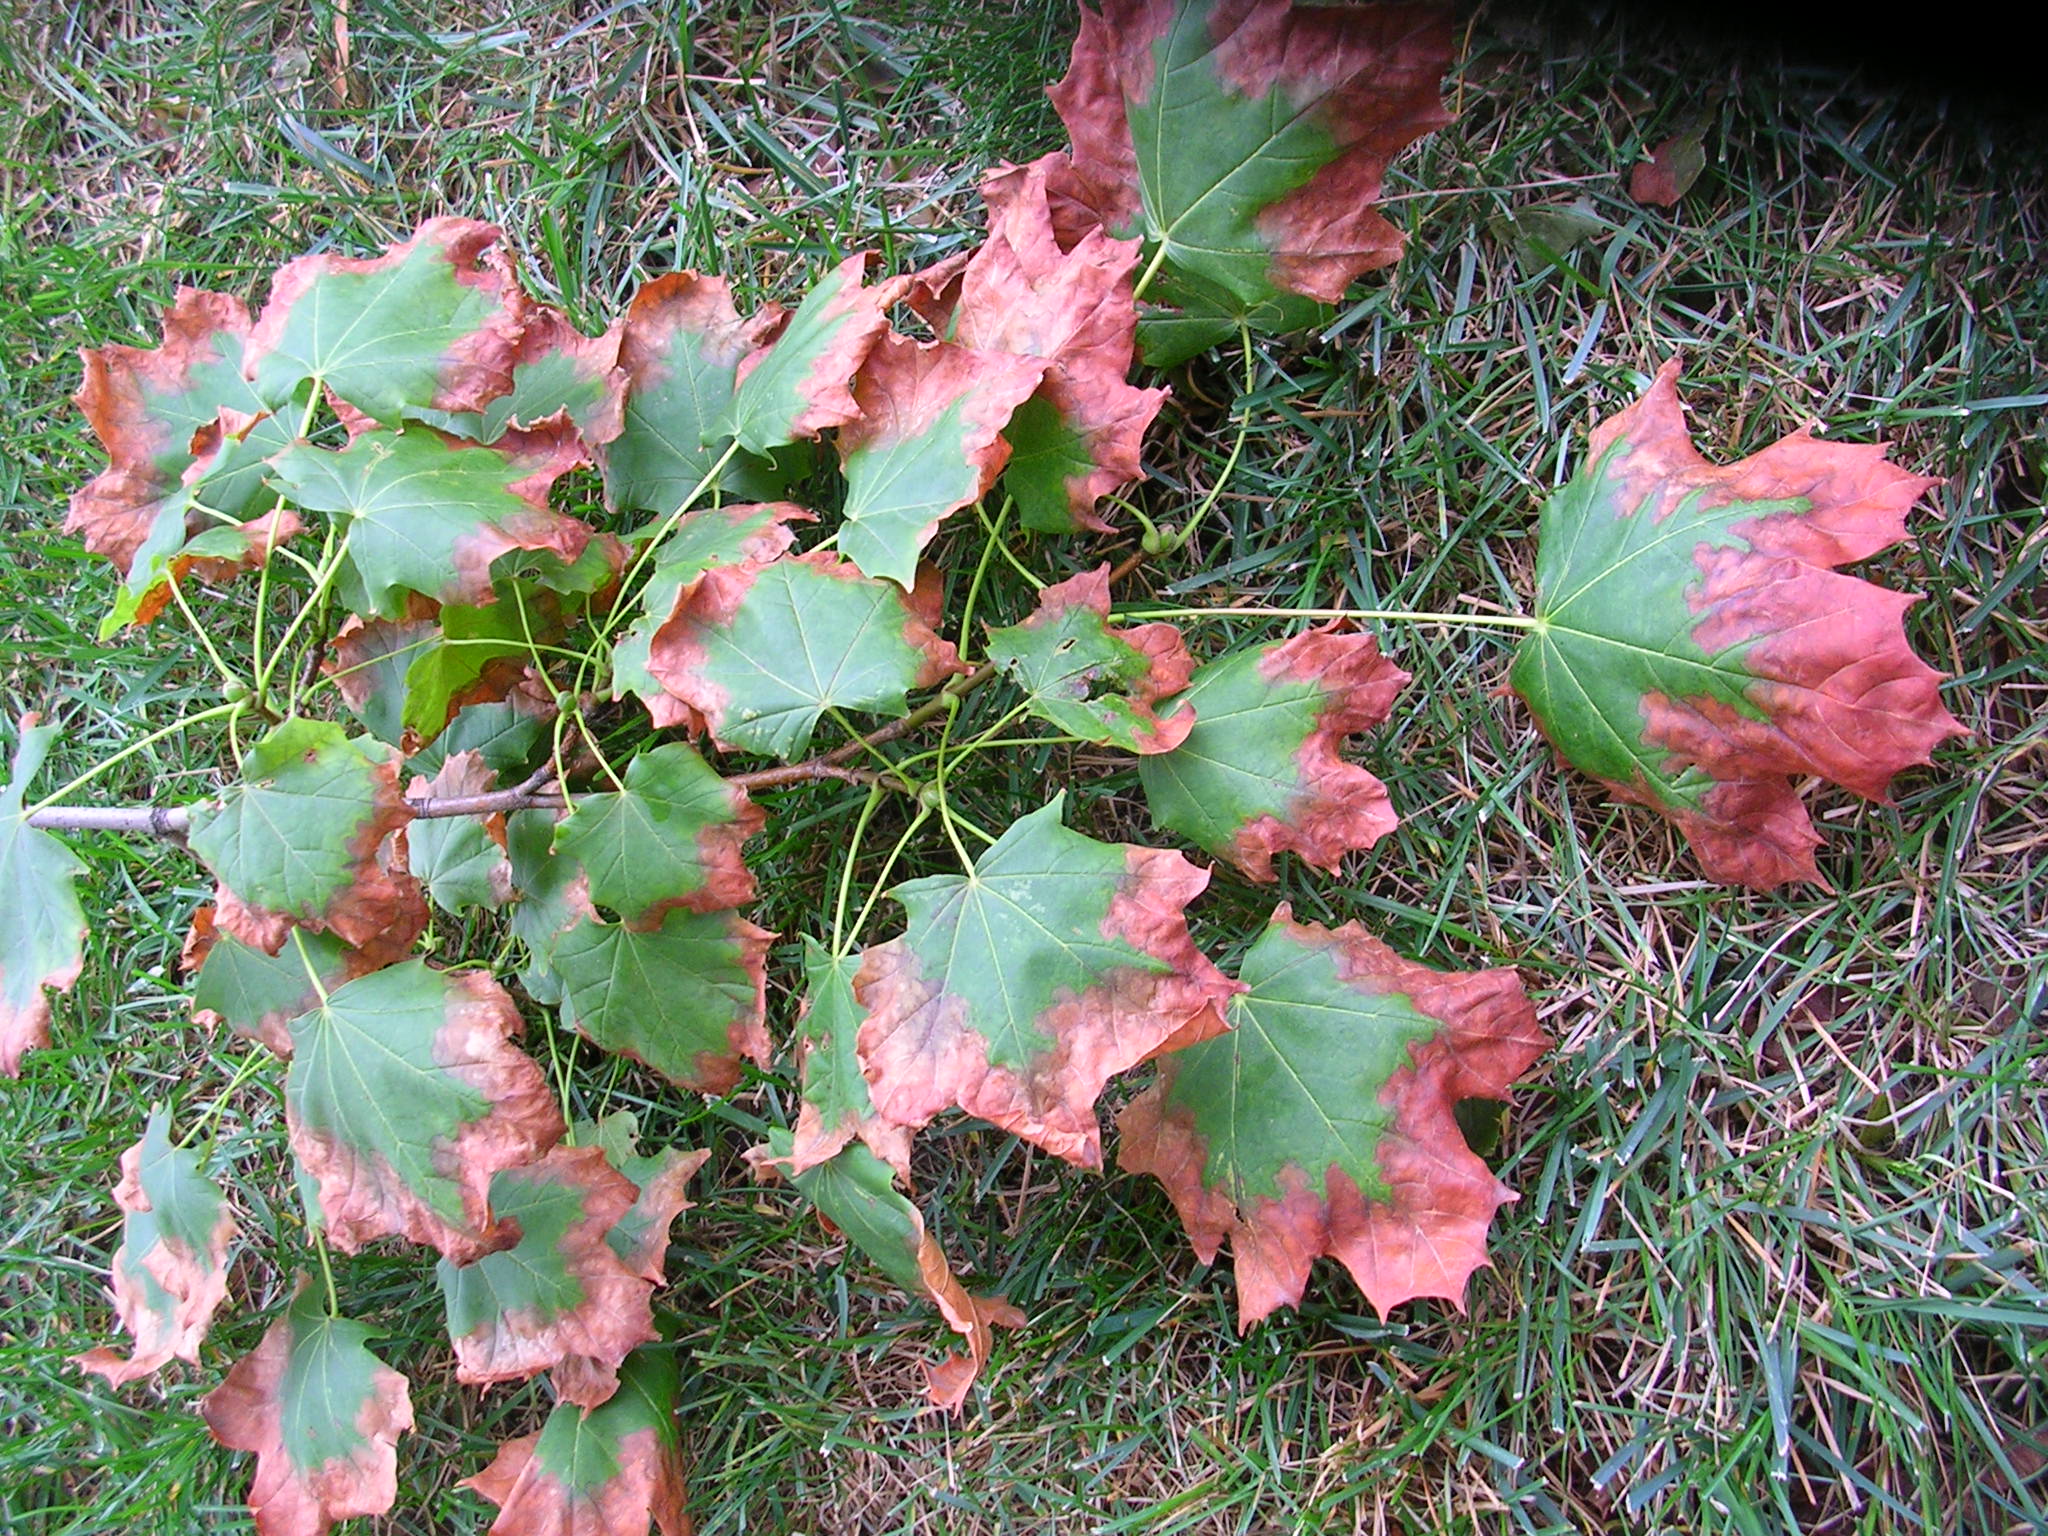 Signs of Under-Watering, Wilted, drooping, or curling leaves that may turn brown at the tips or edge